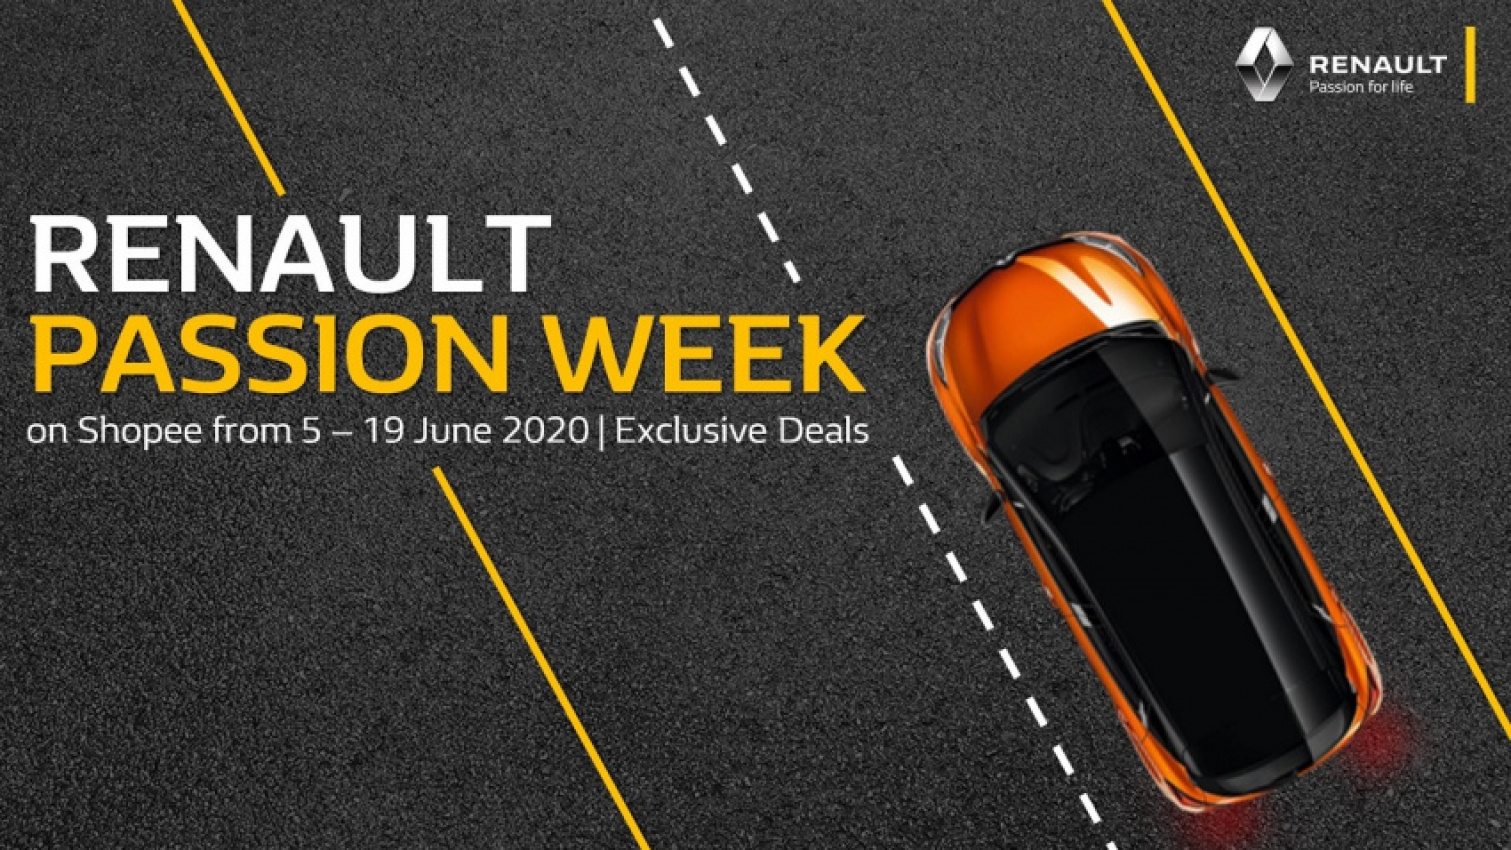 autos, car brands, cars, renault, automotive, cars, crossover, hatchback, malaysia, promotions, renault malaysia, shopee, shopee malaysia, subscription, tc euro cars, tcec, more savings with renault passion week on shopee; new koleos variant introduced